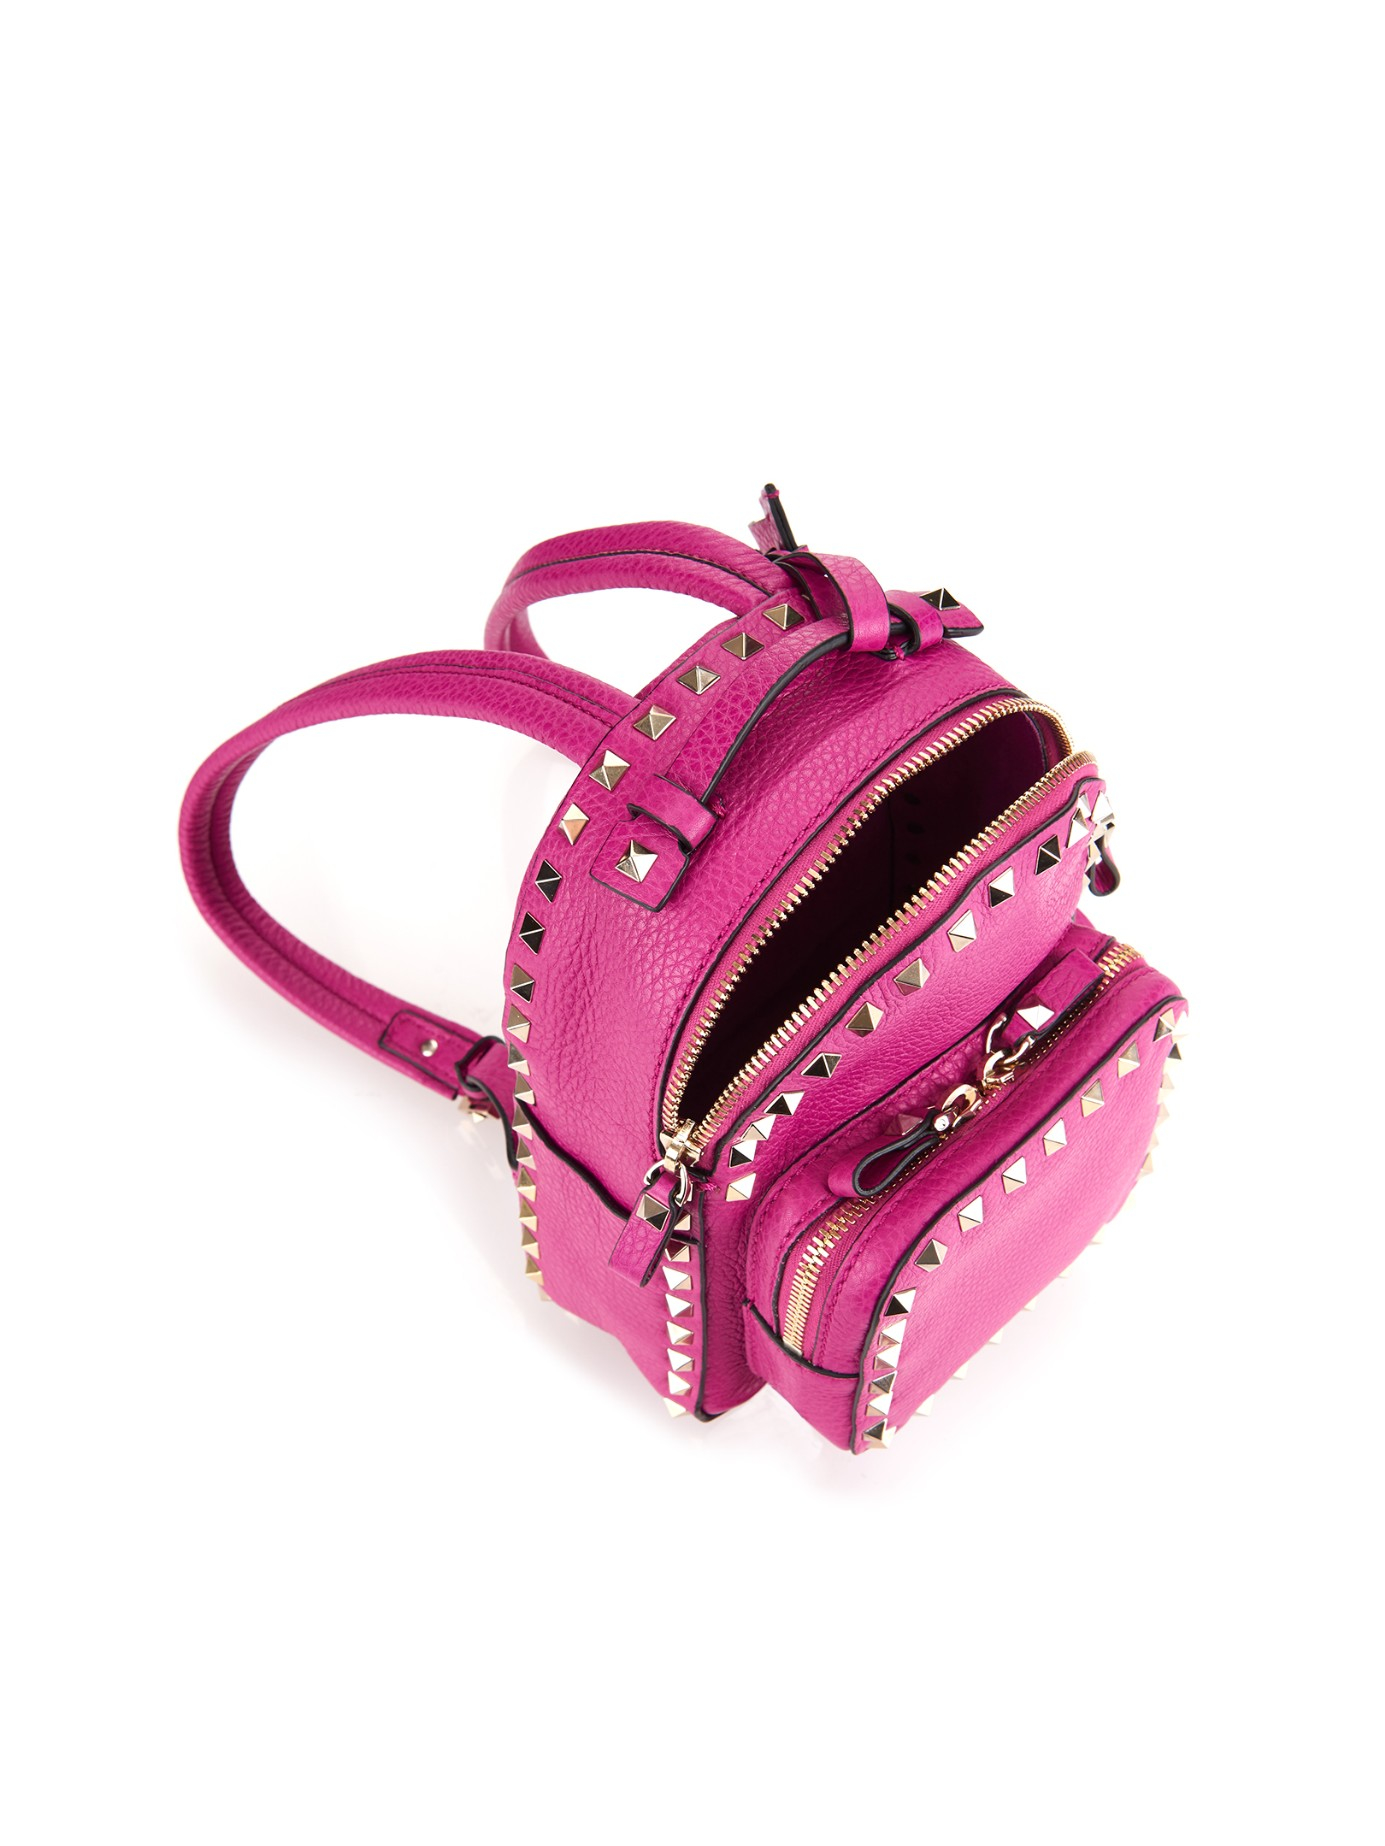 Valentino Rockstud Leather Mini Backpack in Pink - Lyst